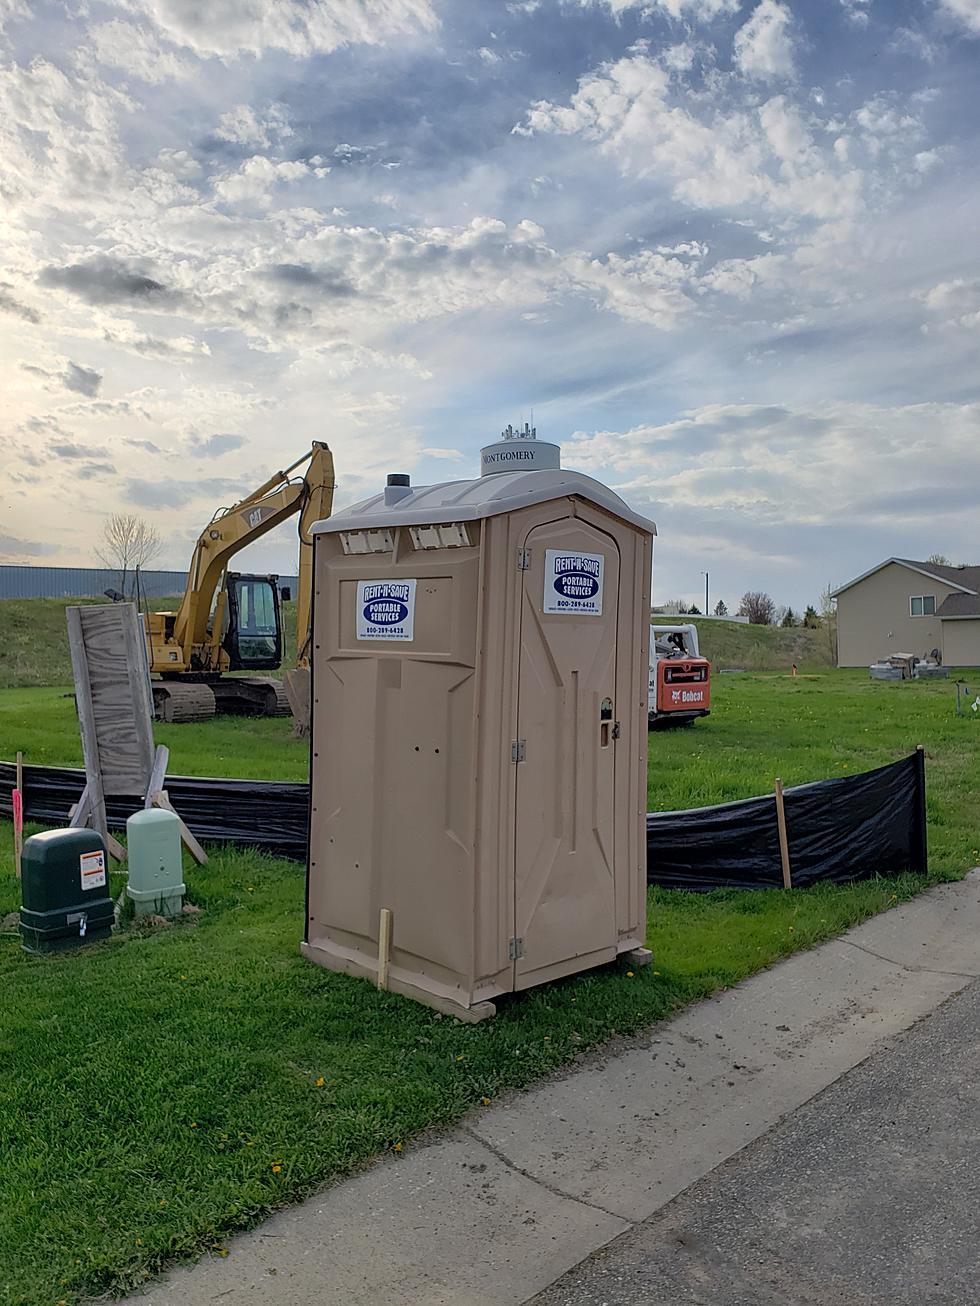 Why Do People Stop And Use Random Port-A Potties?